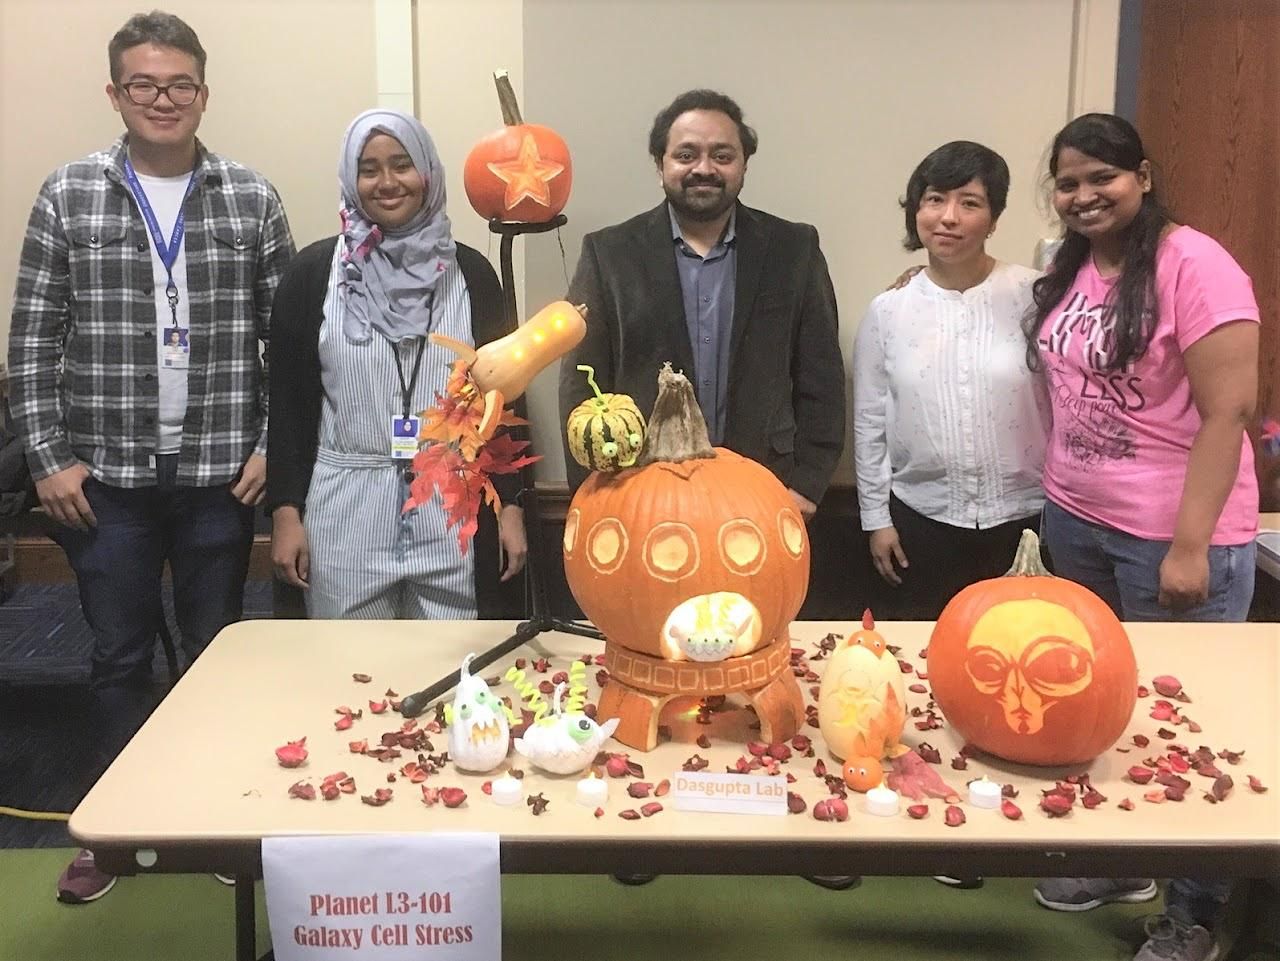 We won the "Most Scientific Pumpkin" carving contest with 'Planet L3-101' Galaxy Cell Stress